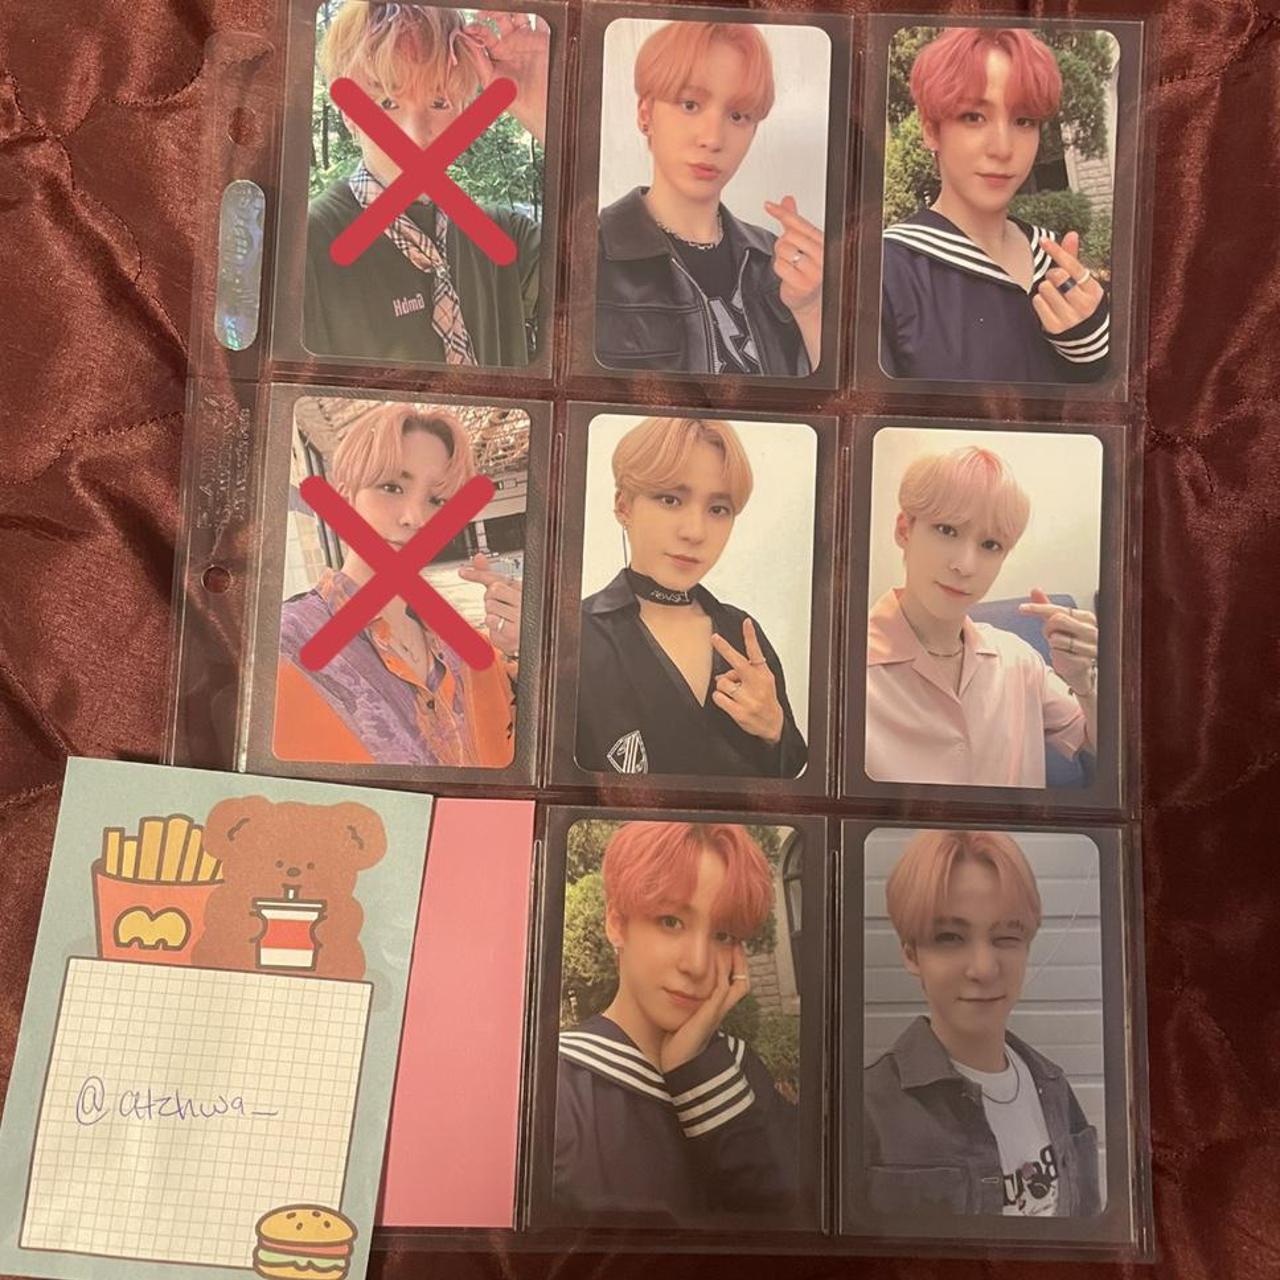 WTS official bts photocards !! these pcs are from - Depop